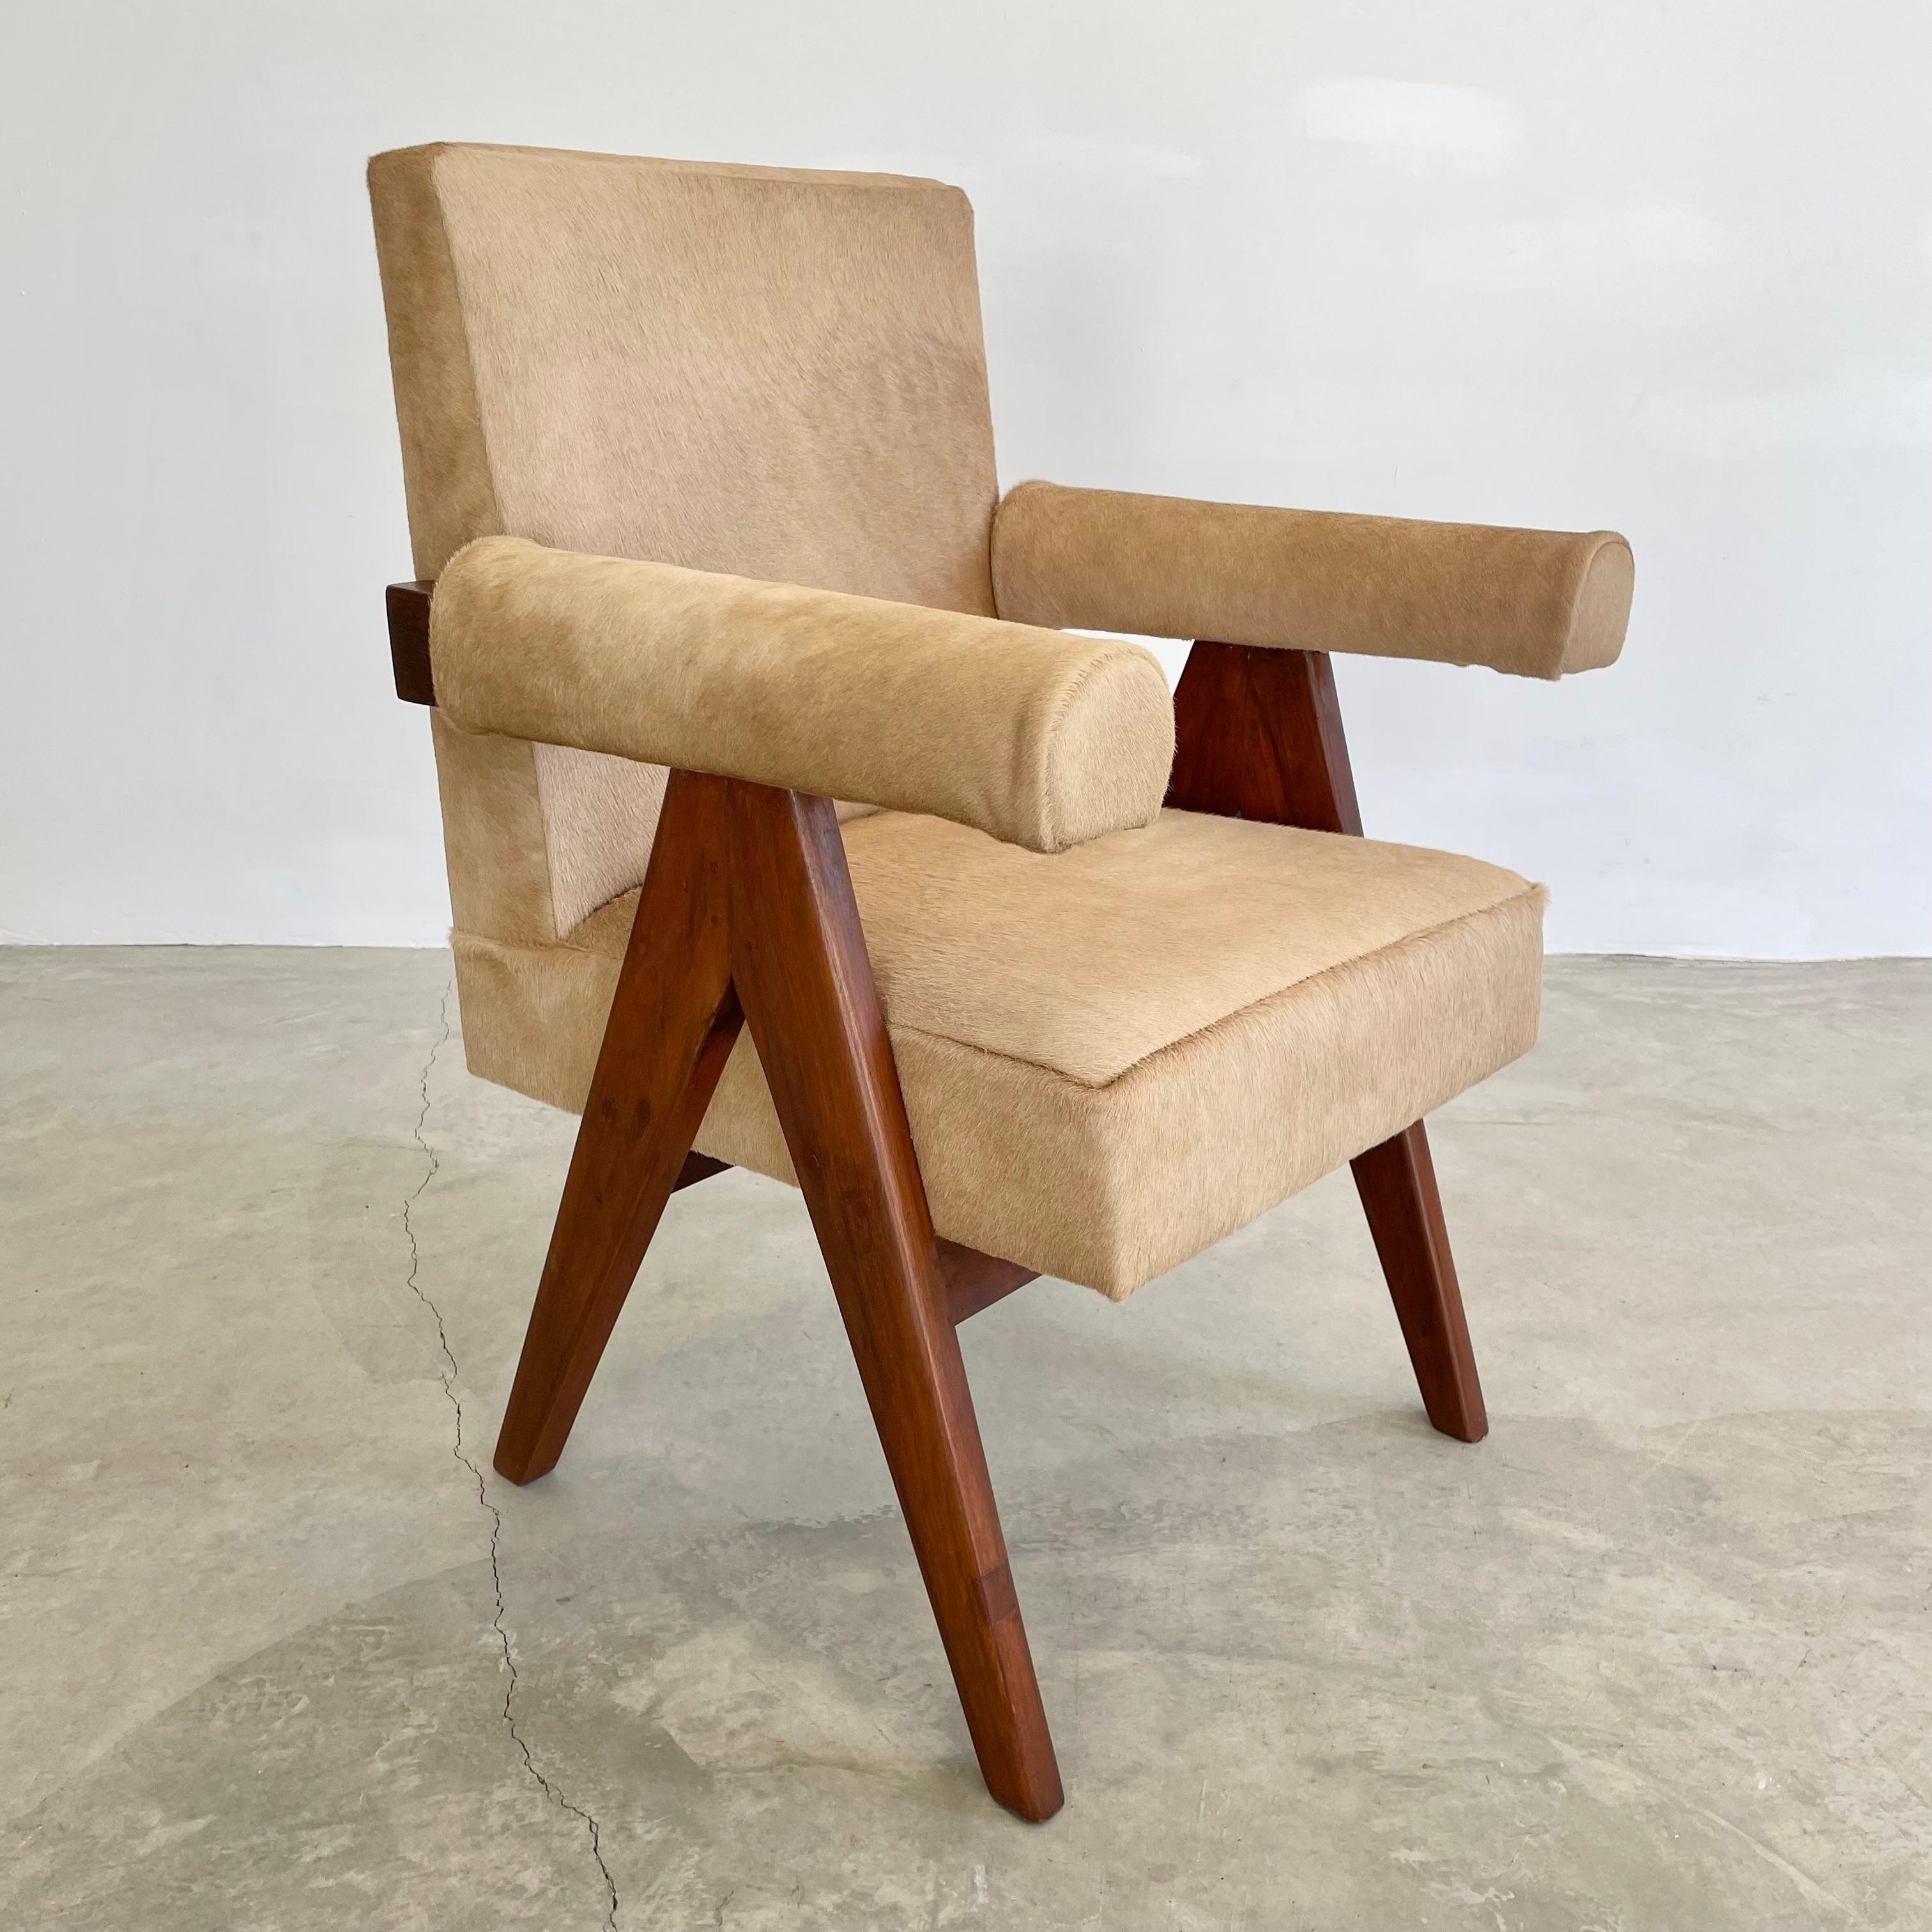 Pierre Jeanneret Senate Chair in Cowhide, 1950s Chandigargh For Sale 4